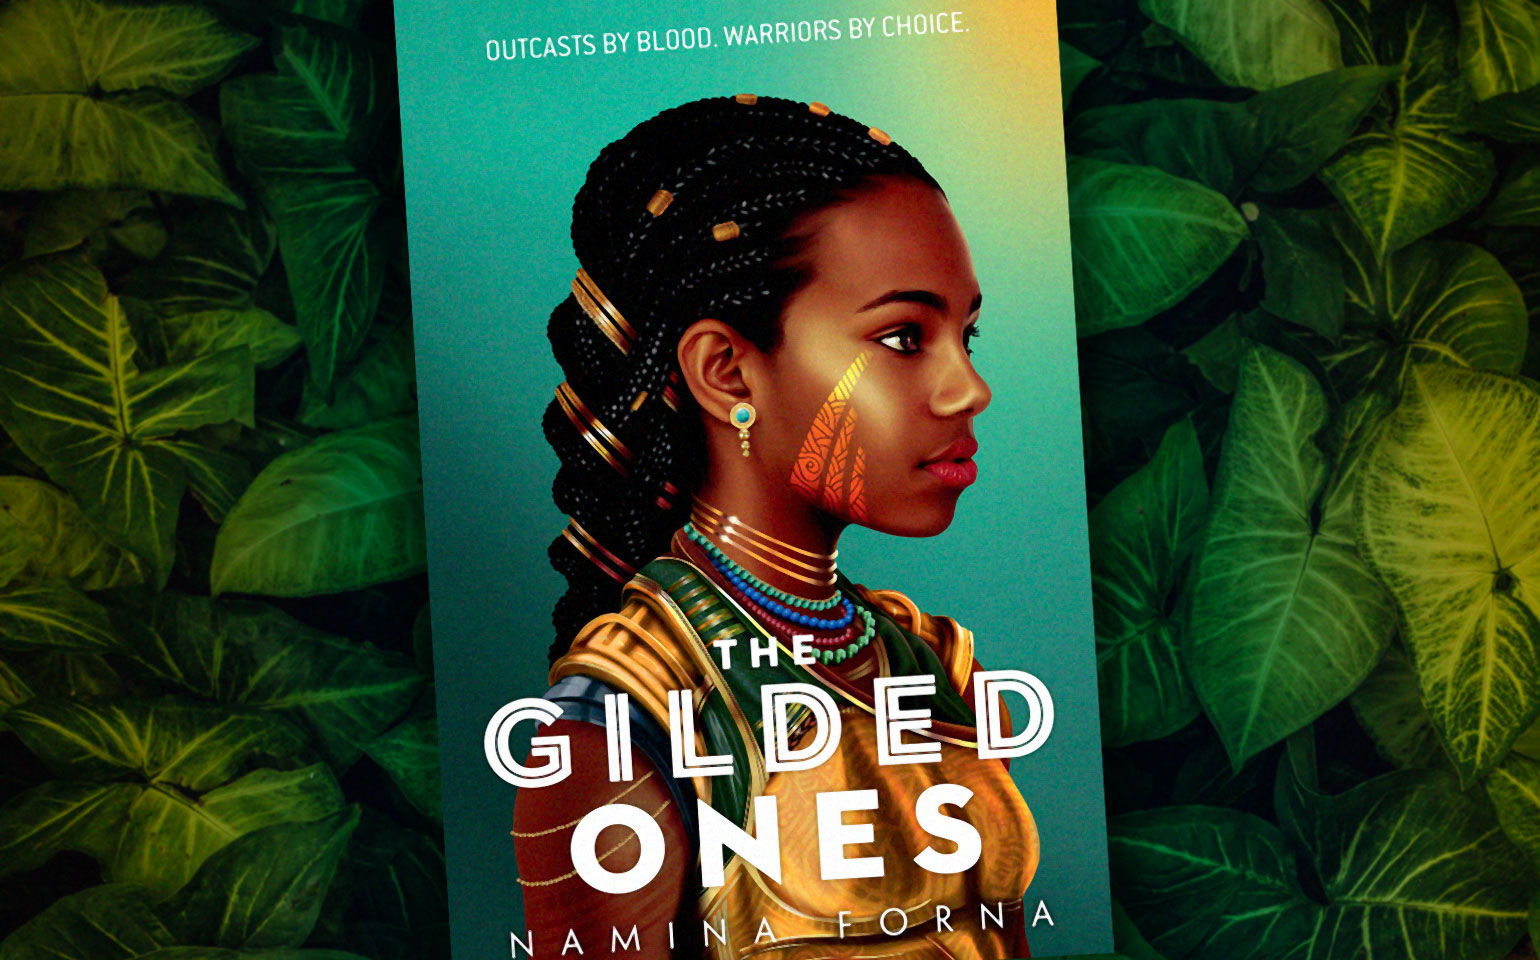 The cover of The Gilded Ones is shown.